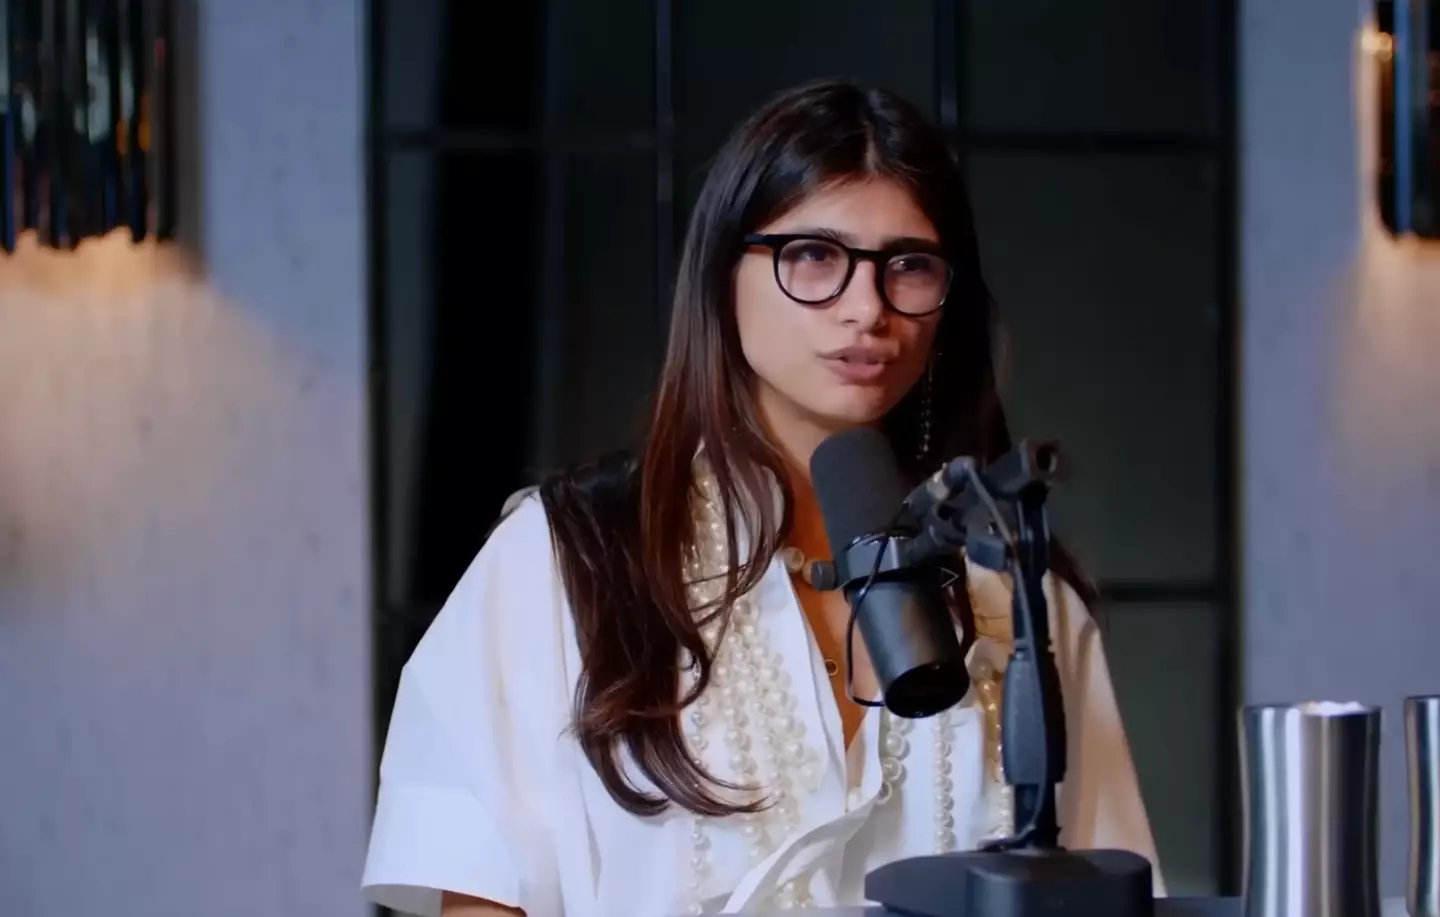 Mia Khalifa spoke about her experiences with Steven Bartlett. (YouTube/The Diary Of A CEO)